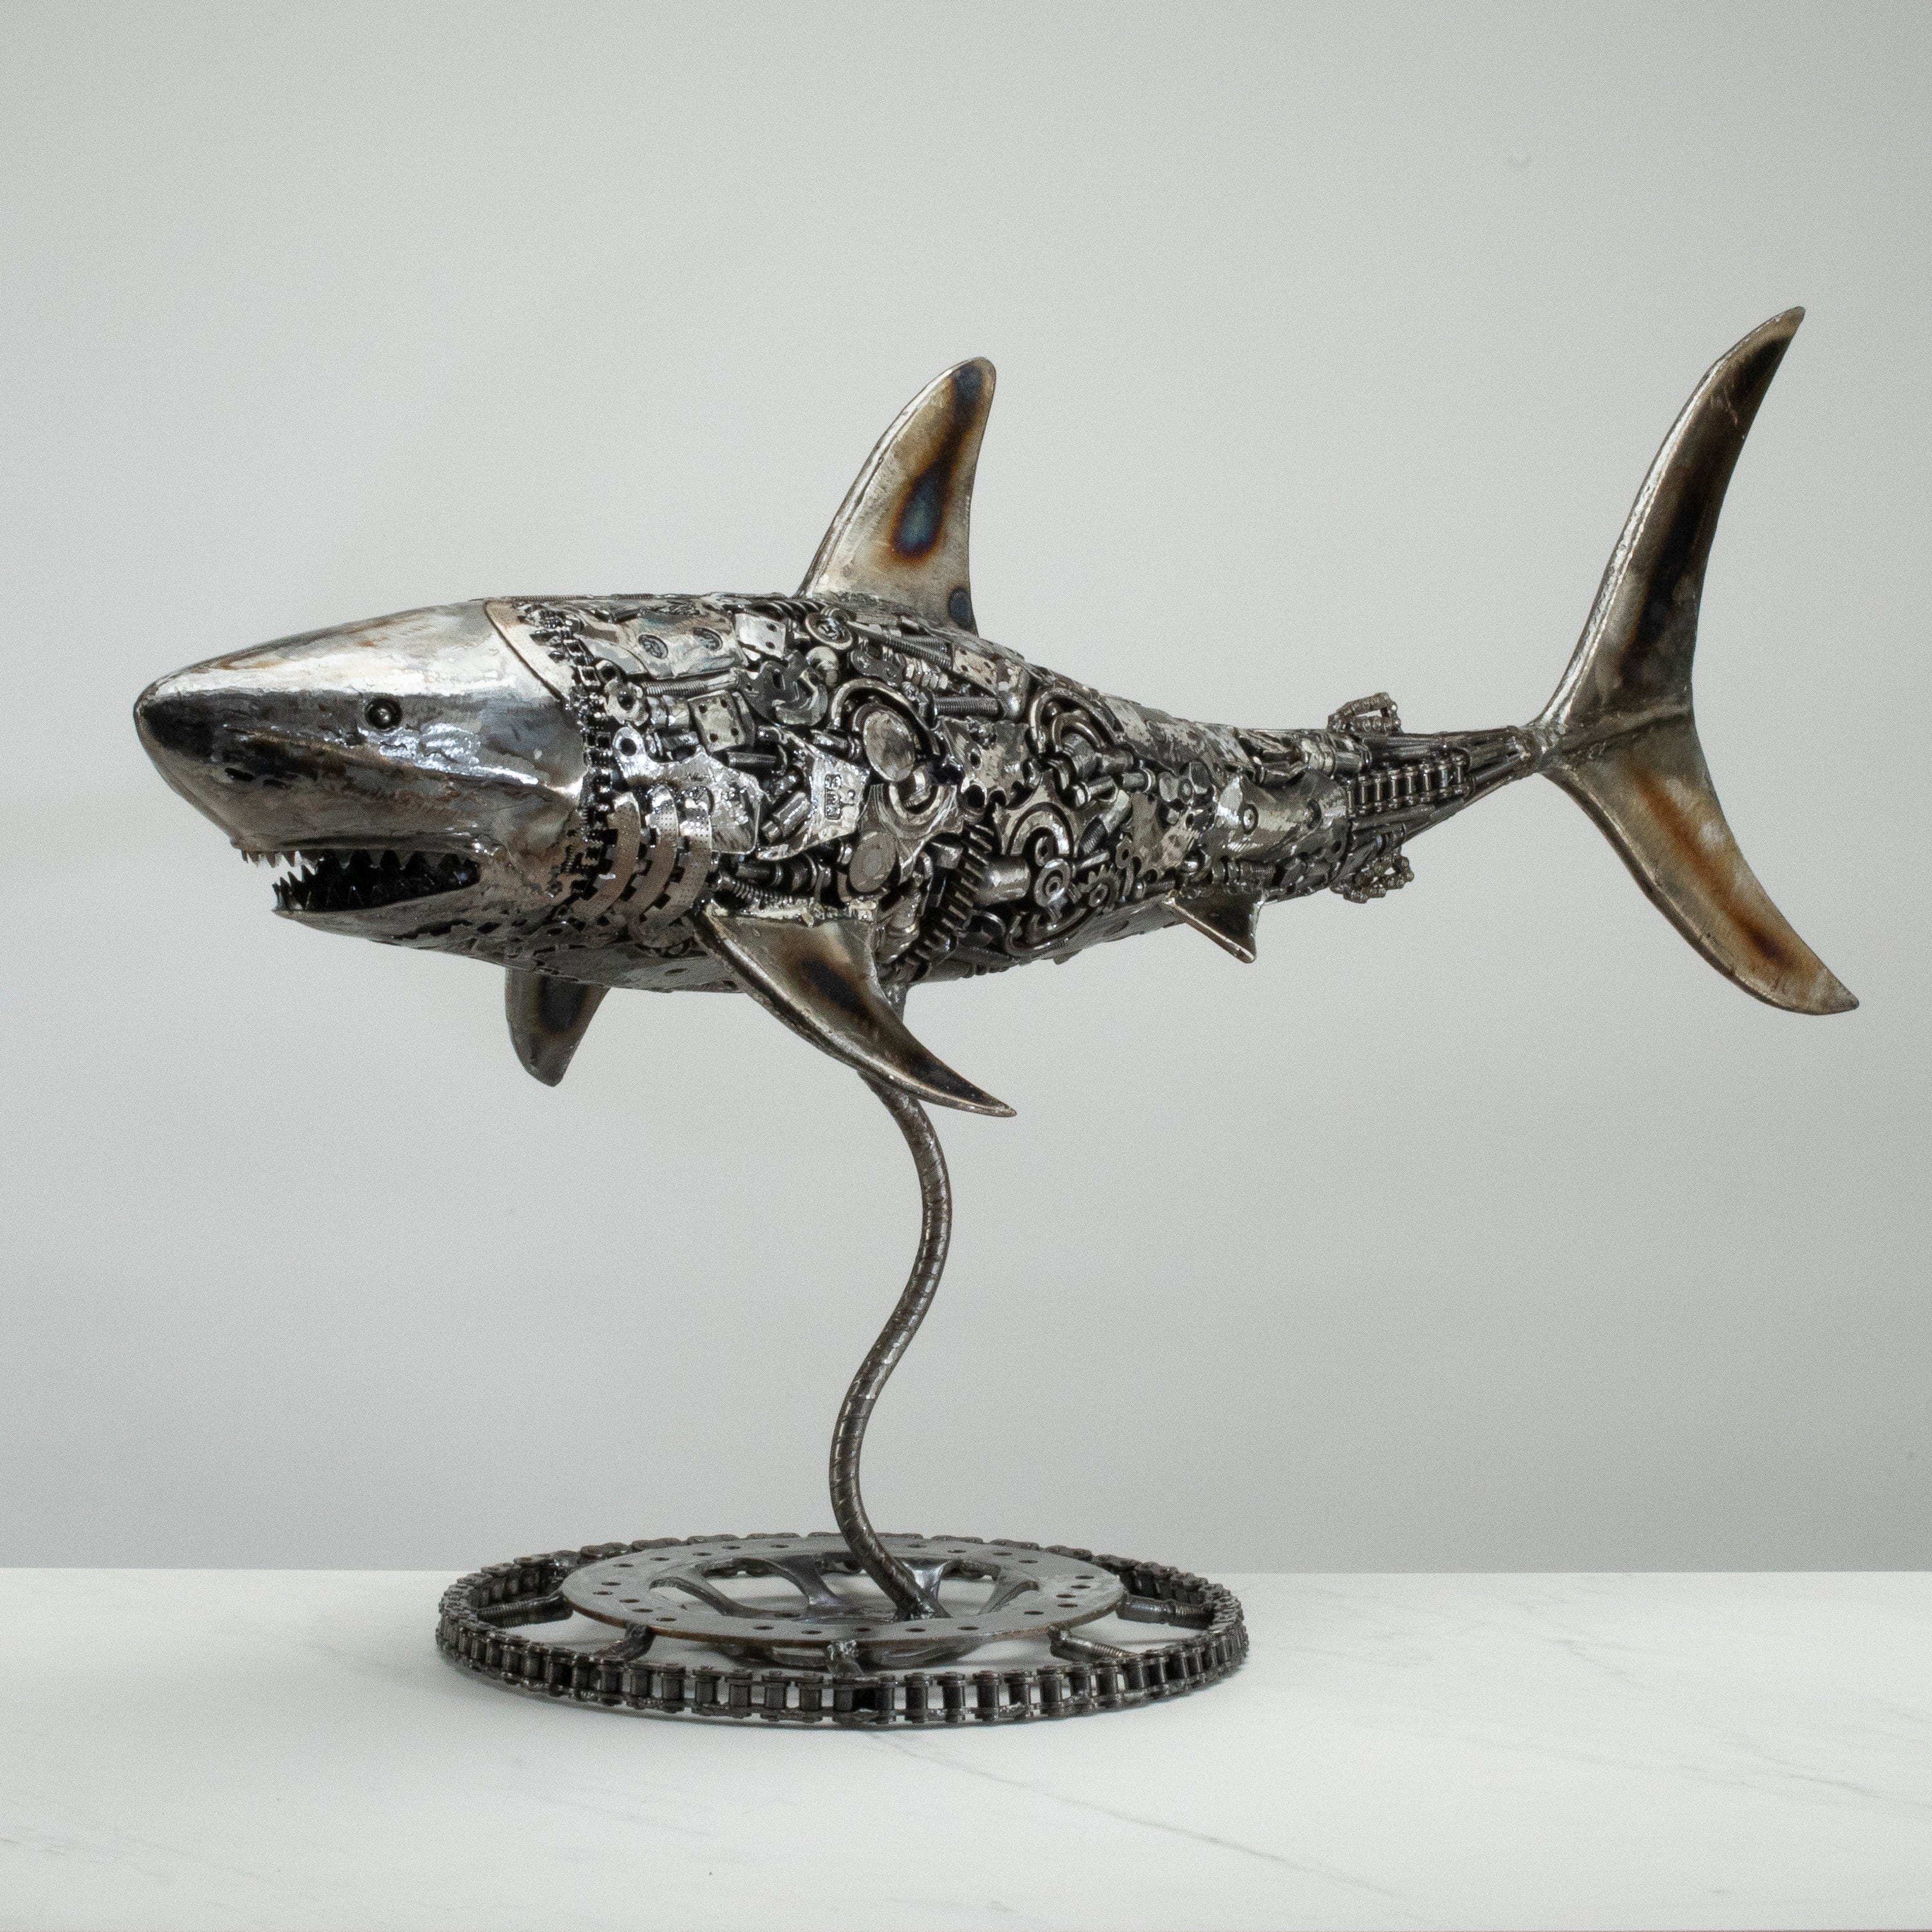 KALIFANO Recycled Metal Art 39" Great White Shark Recycled Metal Art Sculpture RMS-GWS100x52-PK